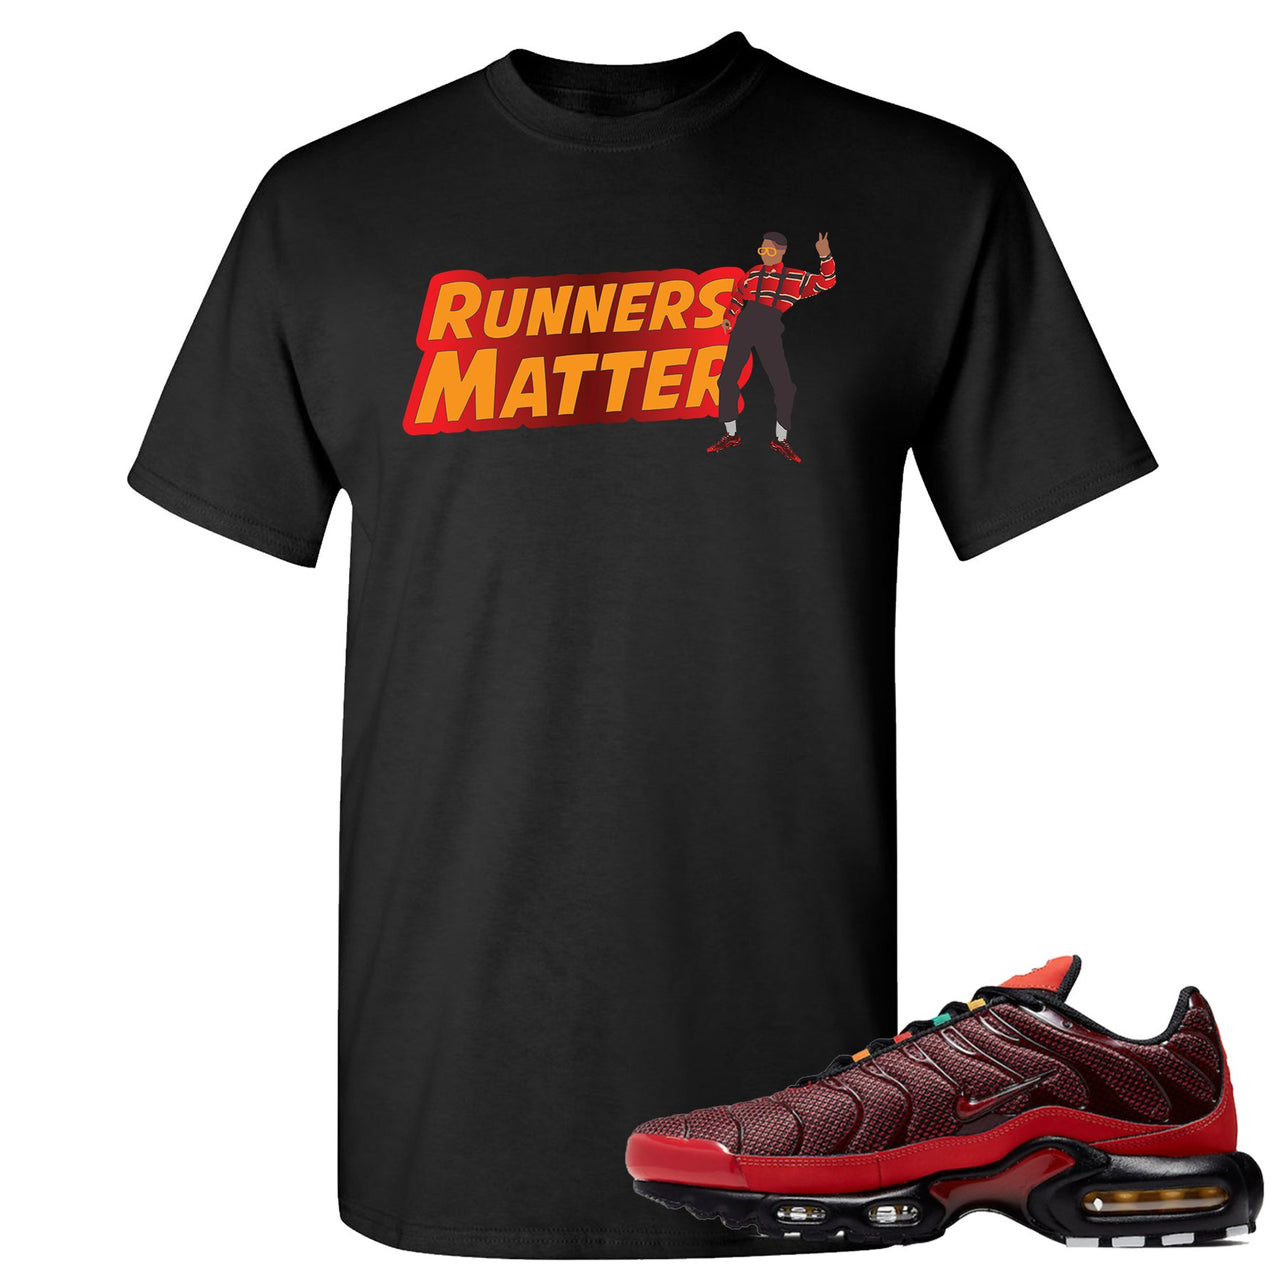 printed on the front of the air max plus sunburst sneaker matching black tee shirt is the runners matter logo